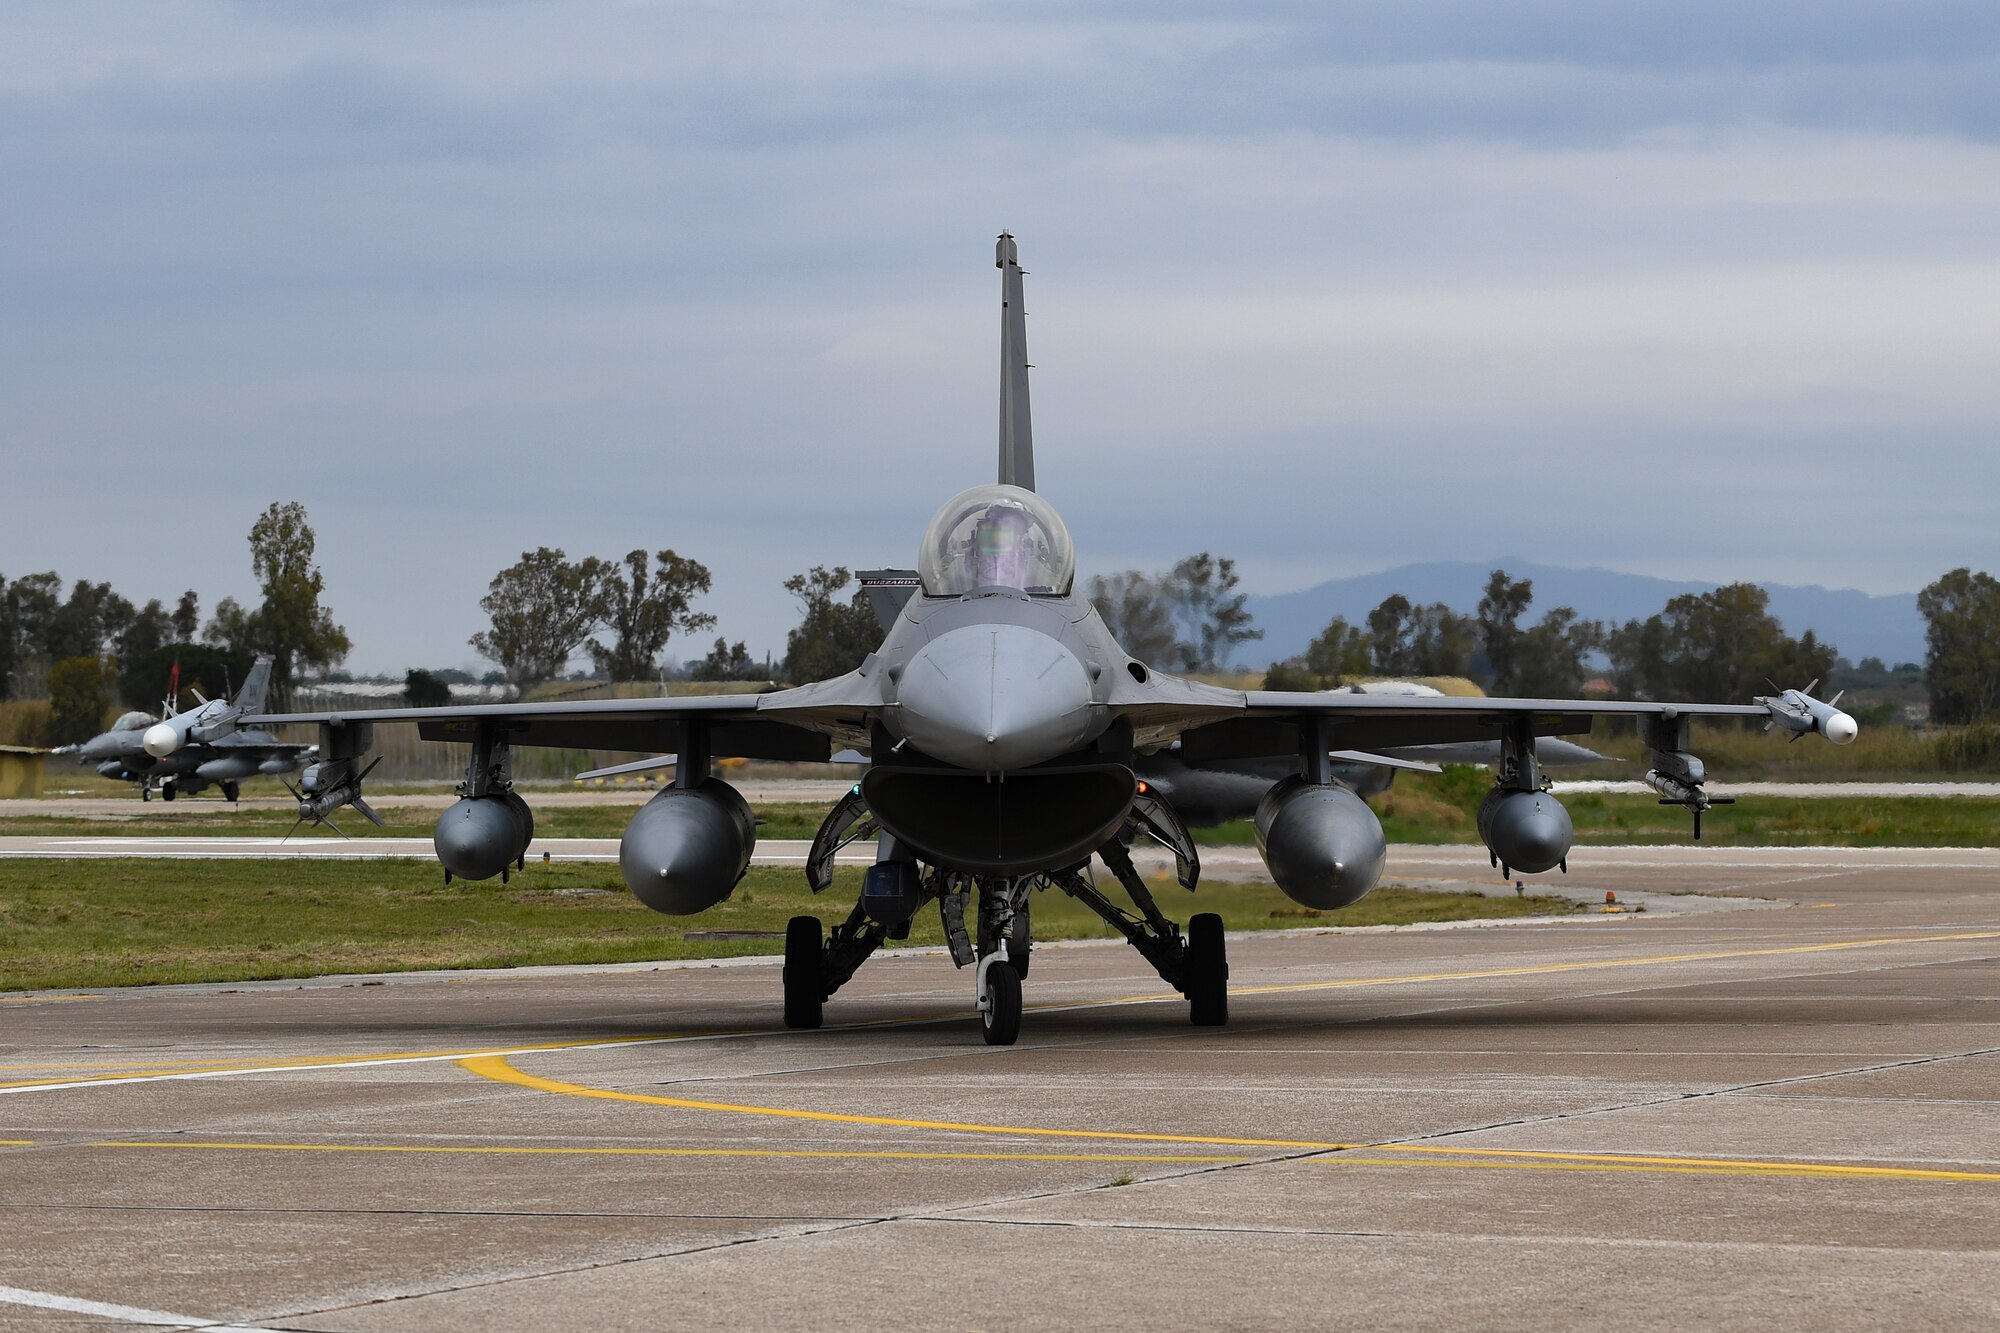 A U.S. Air Force F-16 Fighting Falcon from the 31st Fighter Wing taxis on the runway at Andravida Air Base, Greece, April 6, 2021. F-16s from the 31st FW arrived in Greece to participate in INIOCHOS 21, a Hellenic air force-led, large force flying exercise focused on strengthening partnerships and interoperability. (U.S. Air Force photo by Airman 1st Class Thomas S. Keisler IV)